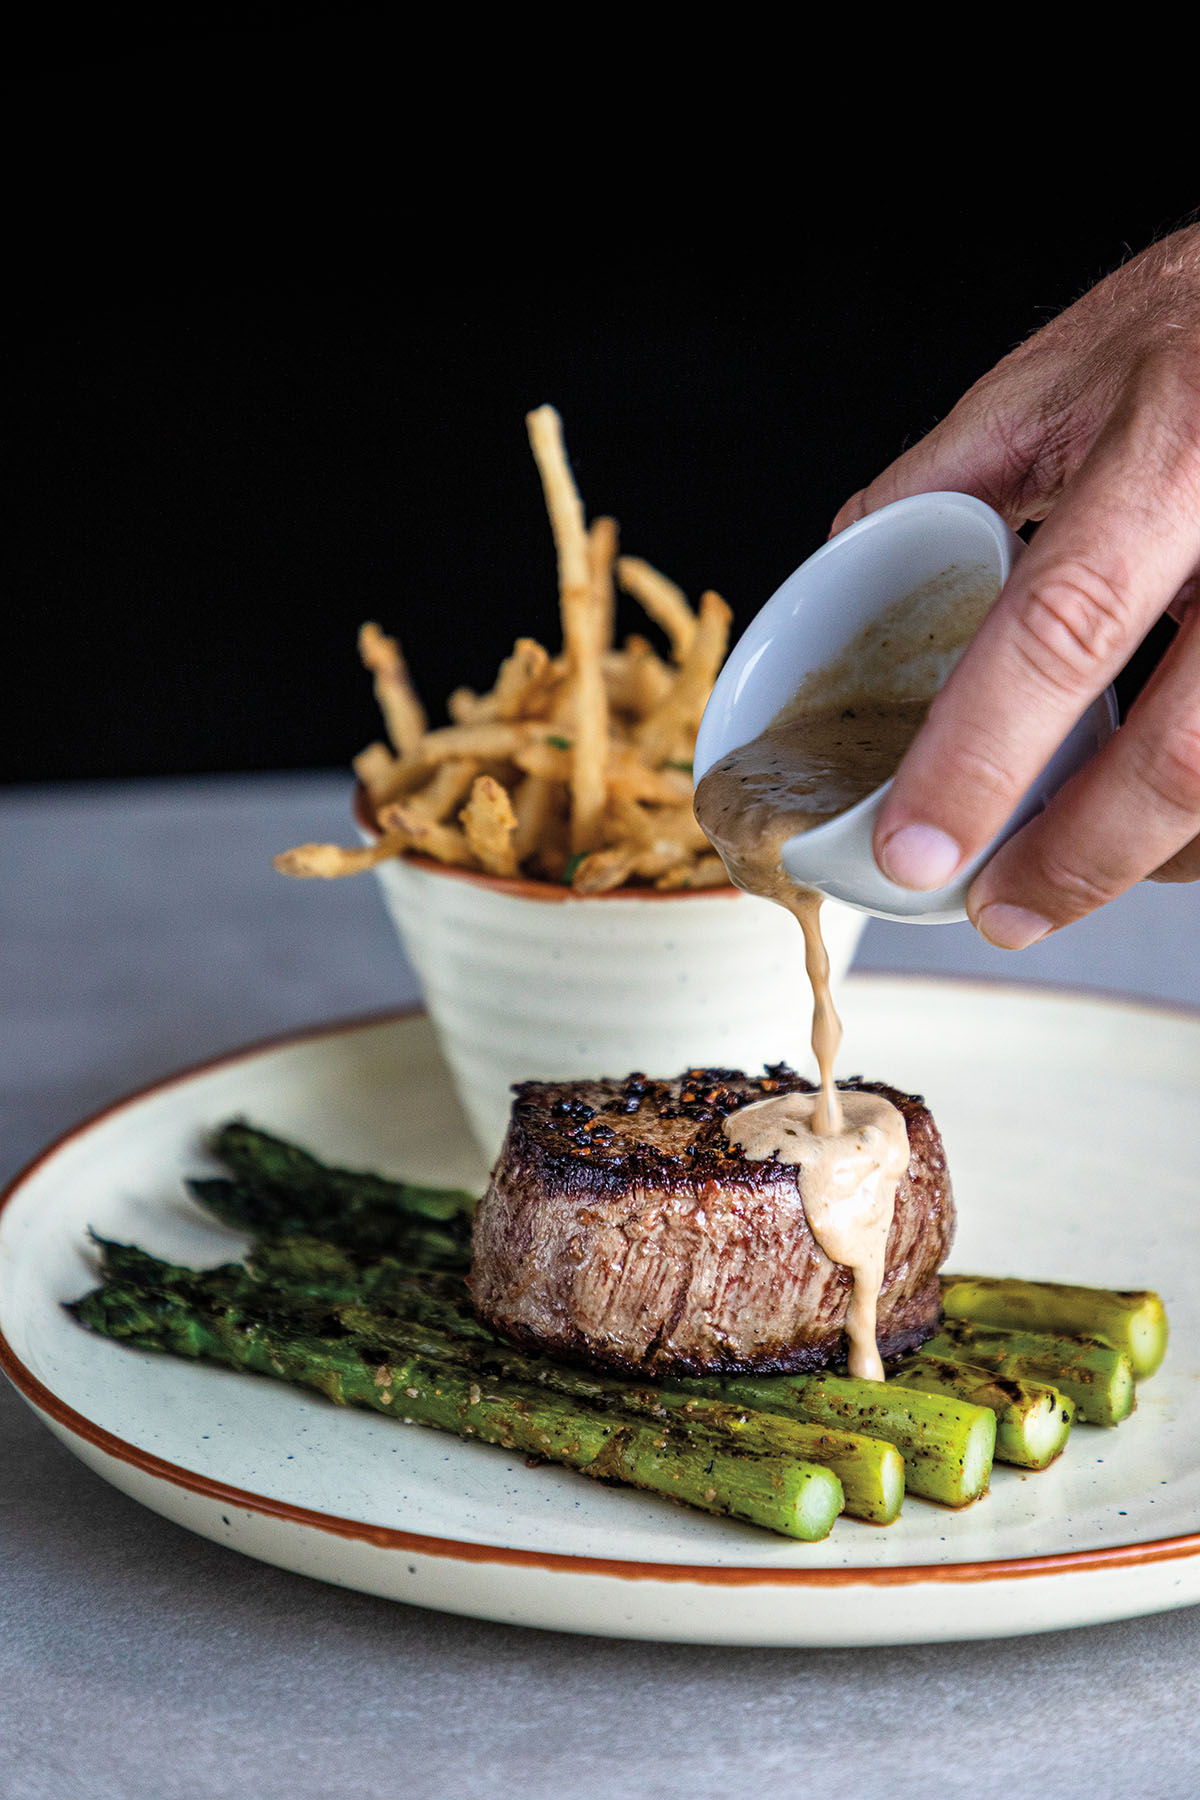 A hand holds a small dish of creamy sauce being poured over a grilled fillet mignon steak over asparagus with a side of French fries